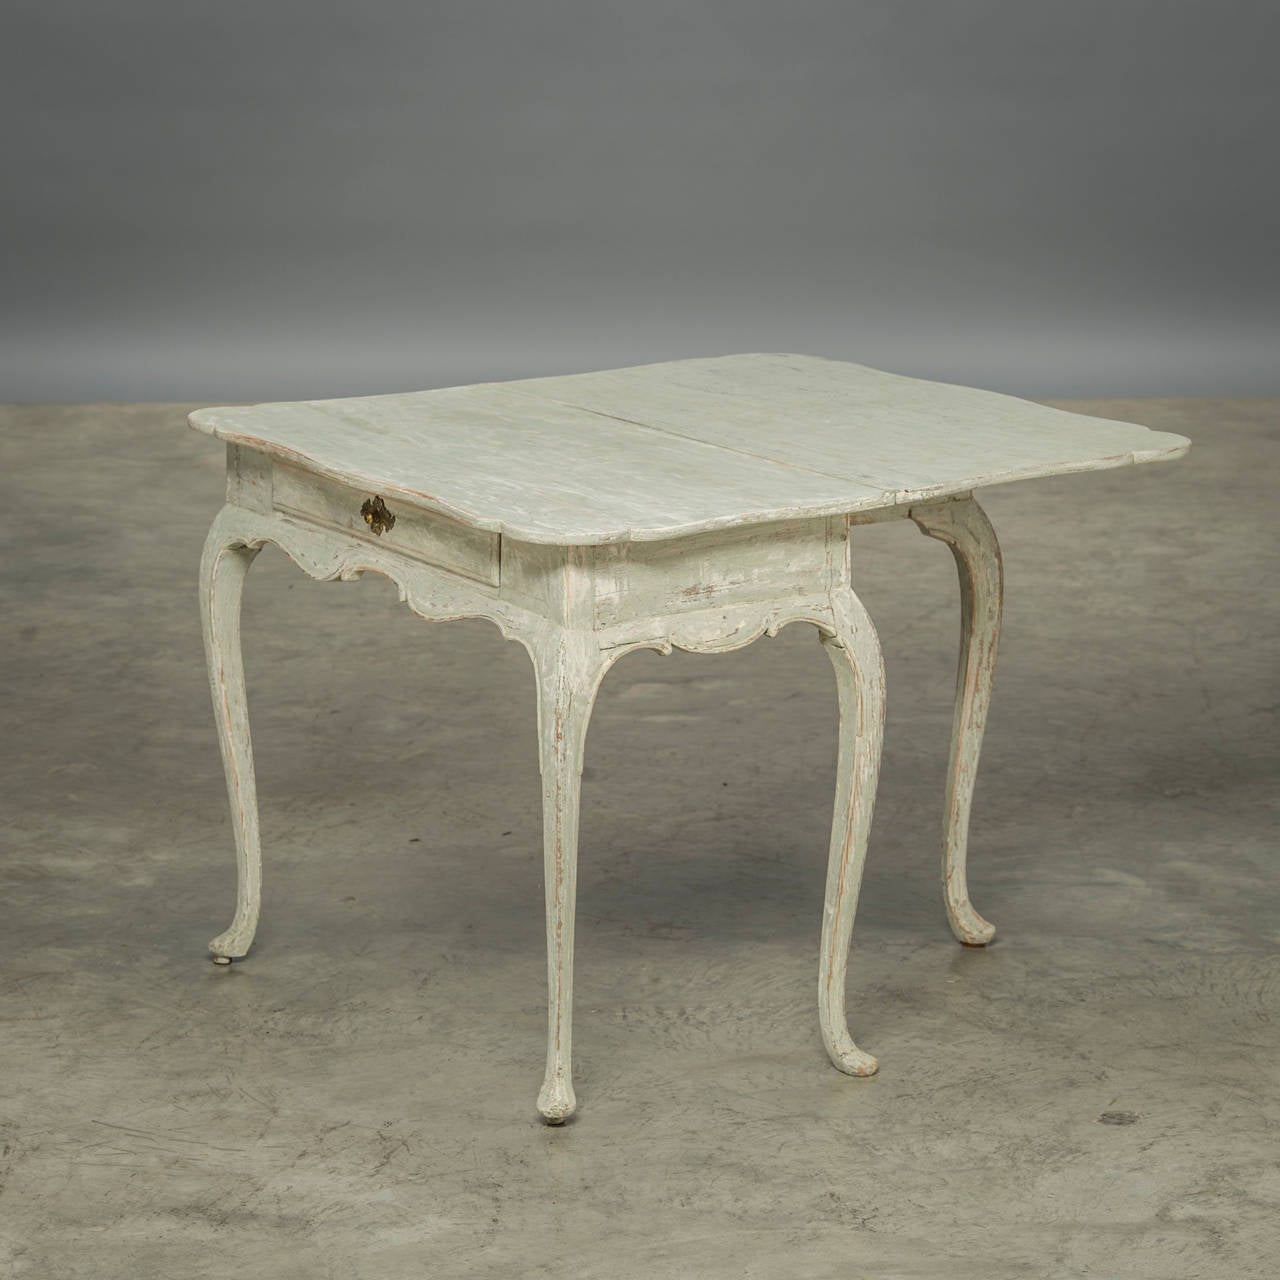 Danish Rococo play table about 1770. Grey/white color to complement the original color. 1 drawer and elegant curved legs.